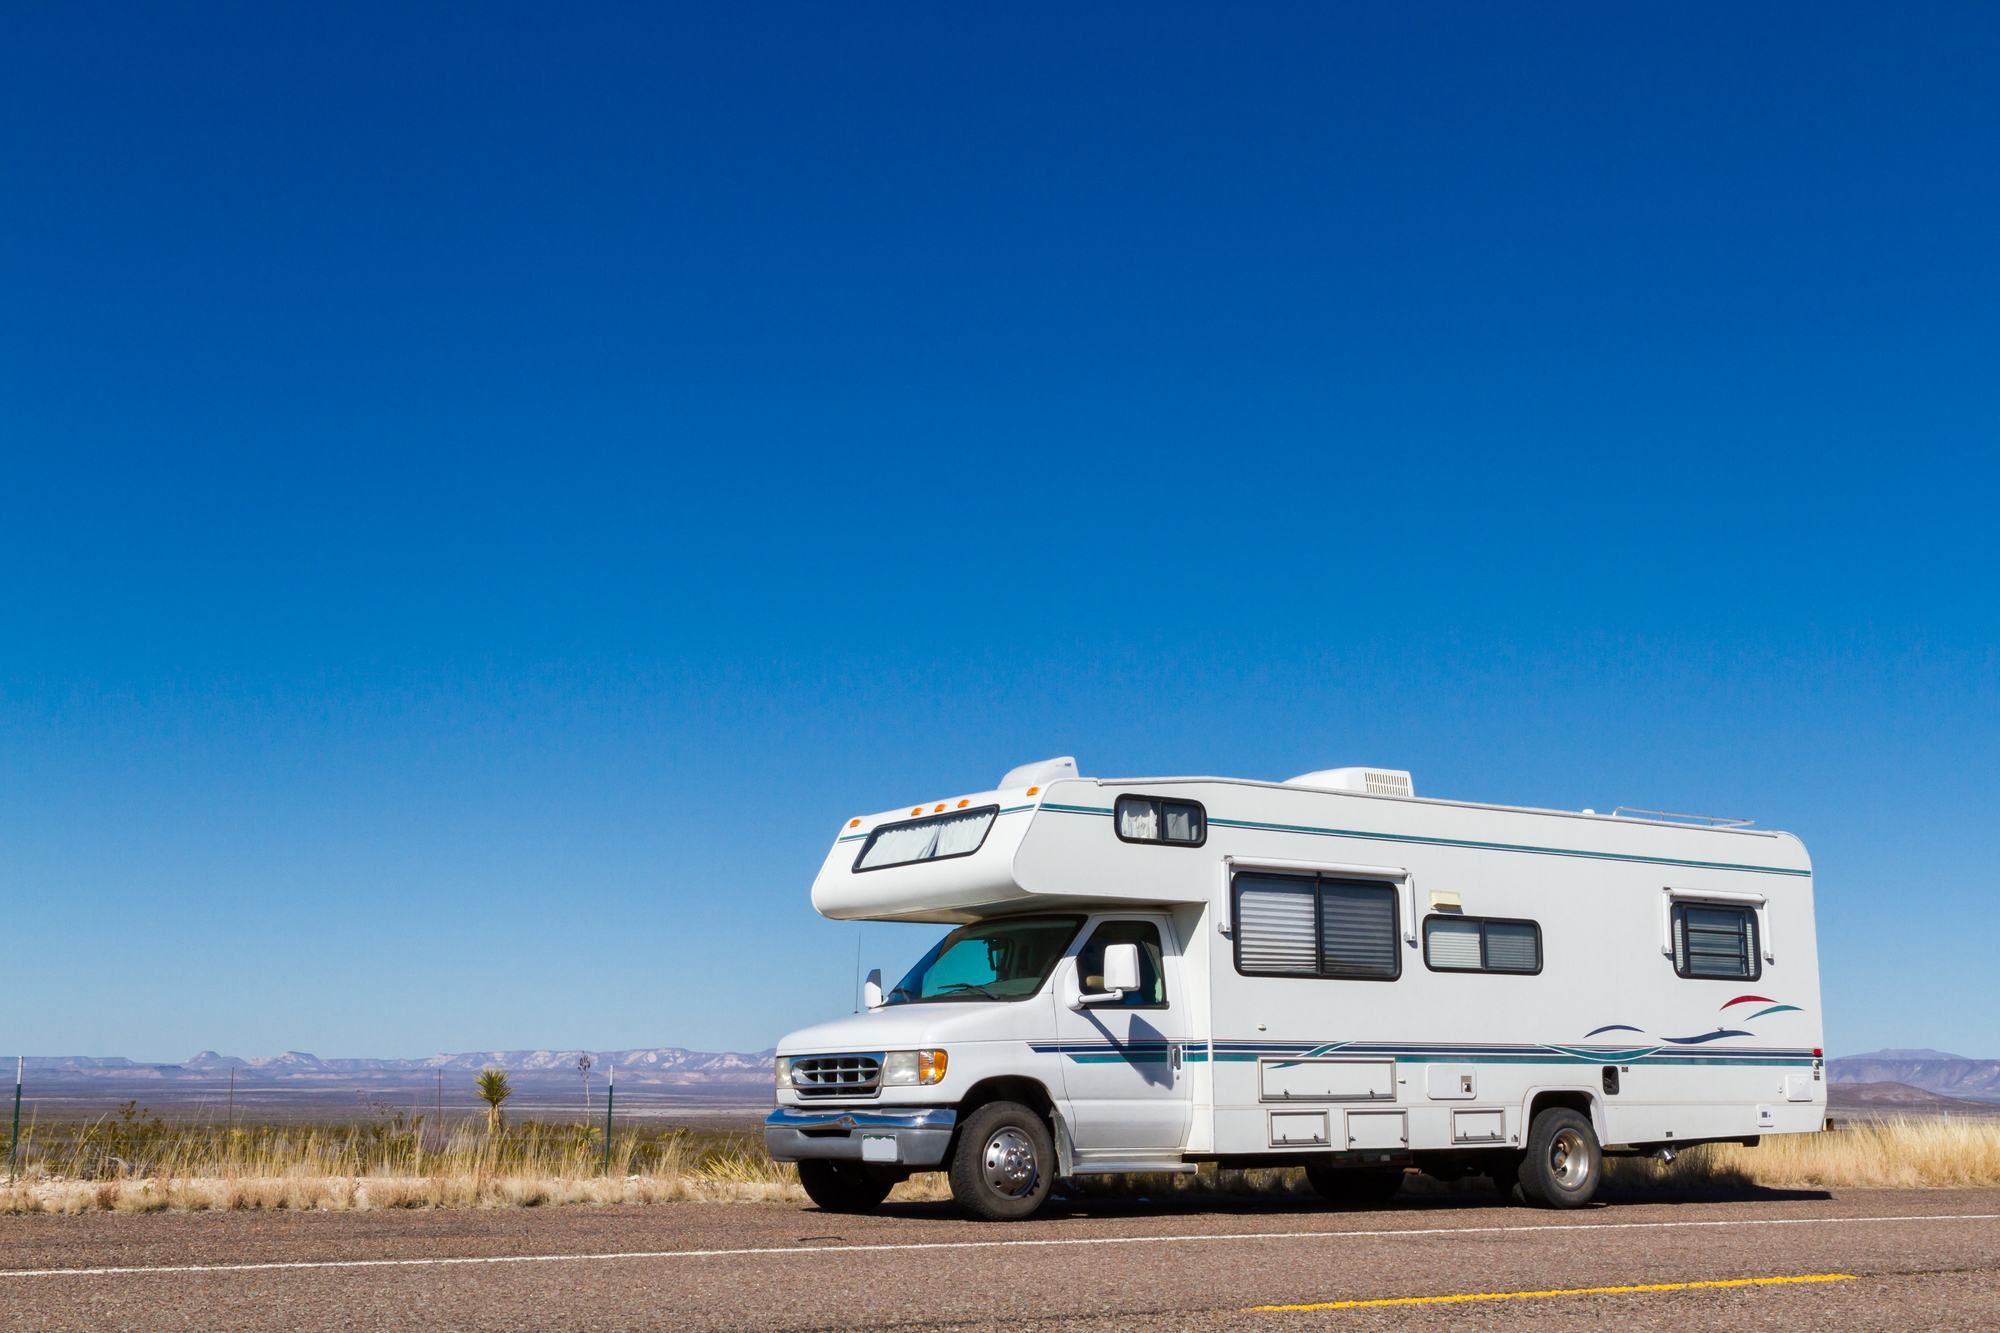 Grand Design Makes Leaky RV, Provides Bogus ‘Fixes’ to Waste Warranty Period, Class Action Alleges